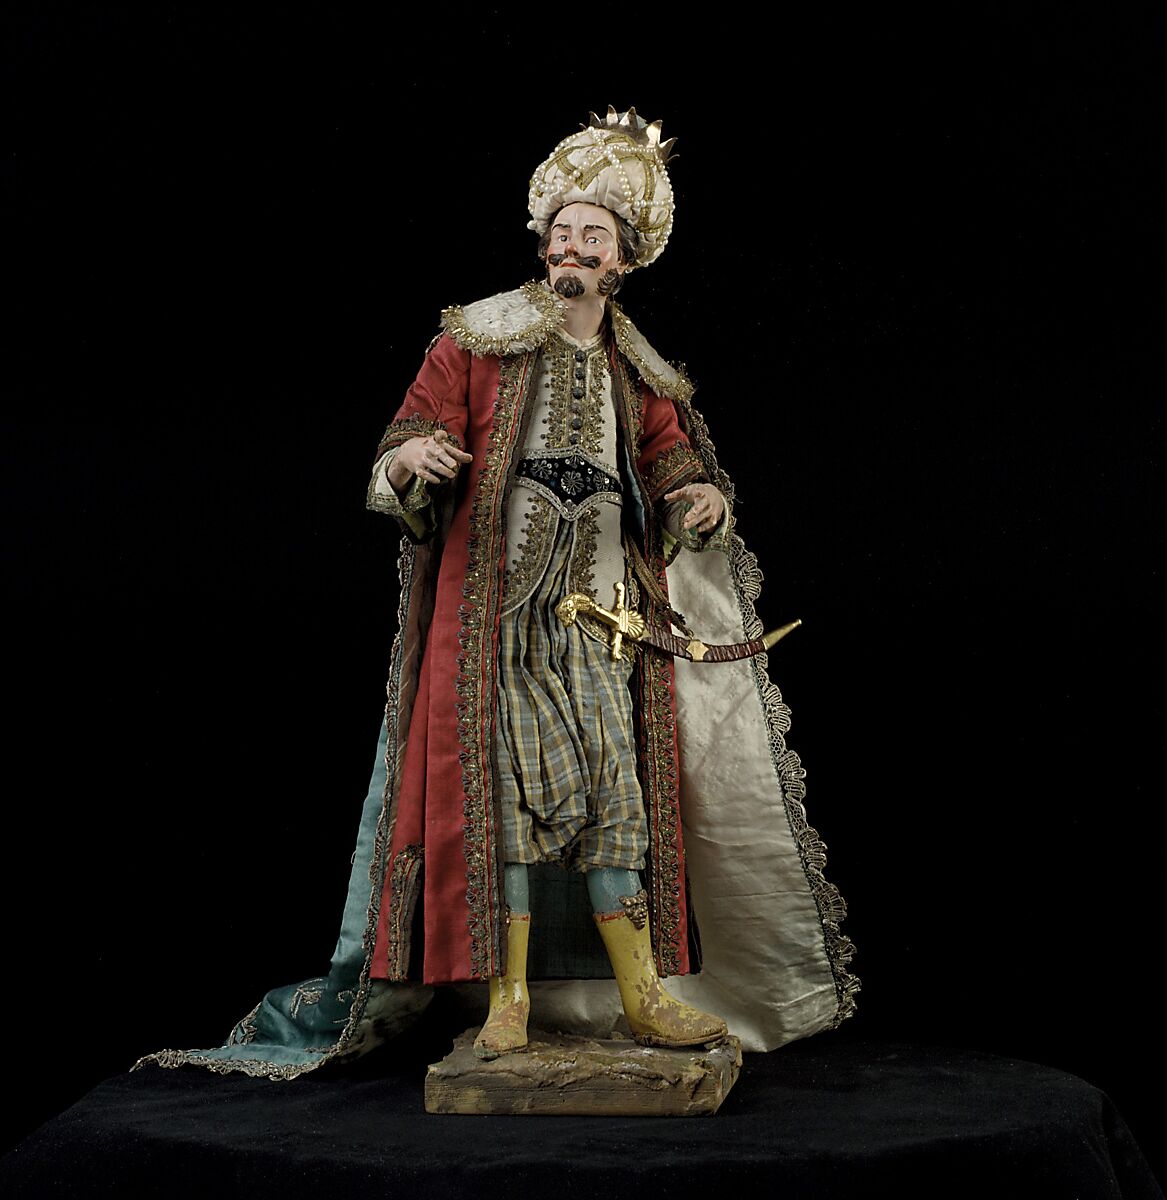 King, Nicola Ingaldi, Polychromed terracotta head and wooden limbs; body of wire wrapped in tow; satin, silk and velvet garments; silver and metallic thread; silver-gilt sword and crown; leather sheath